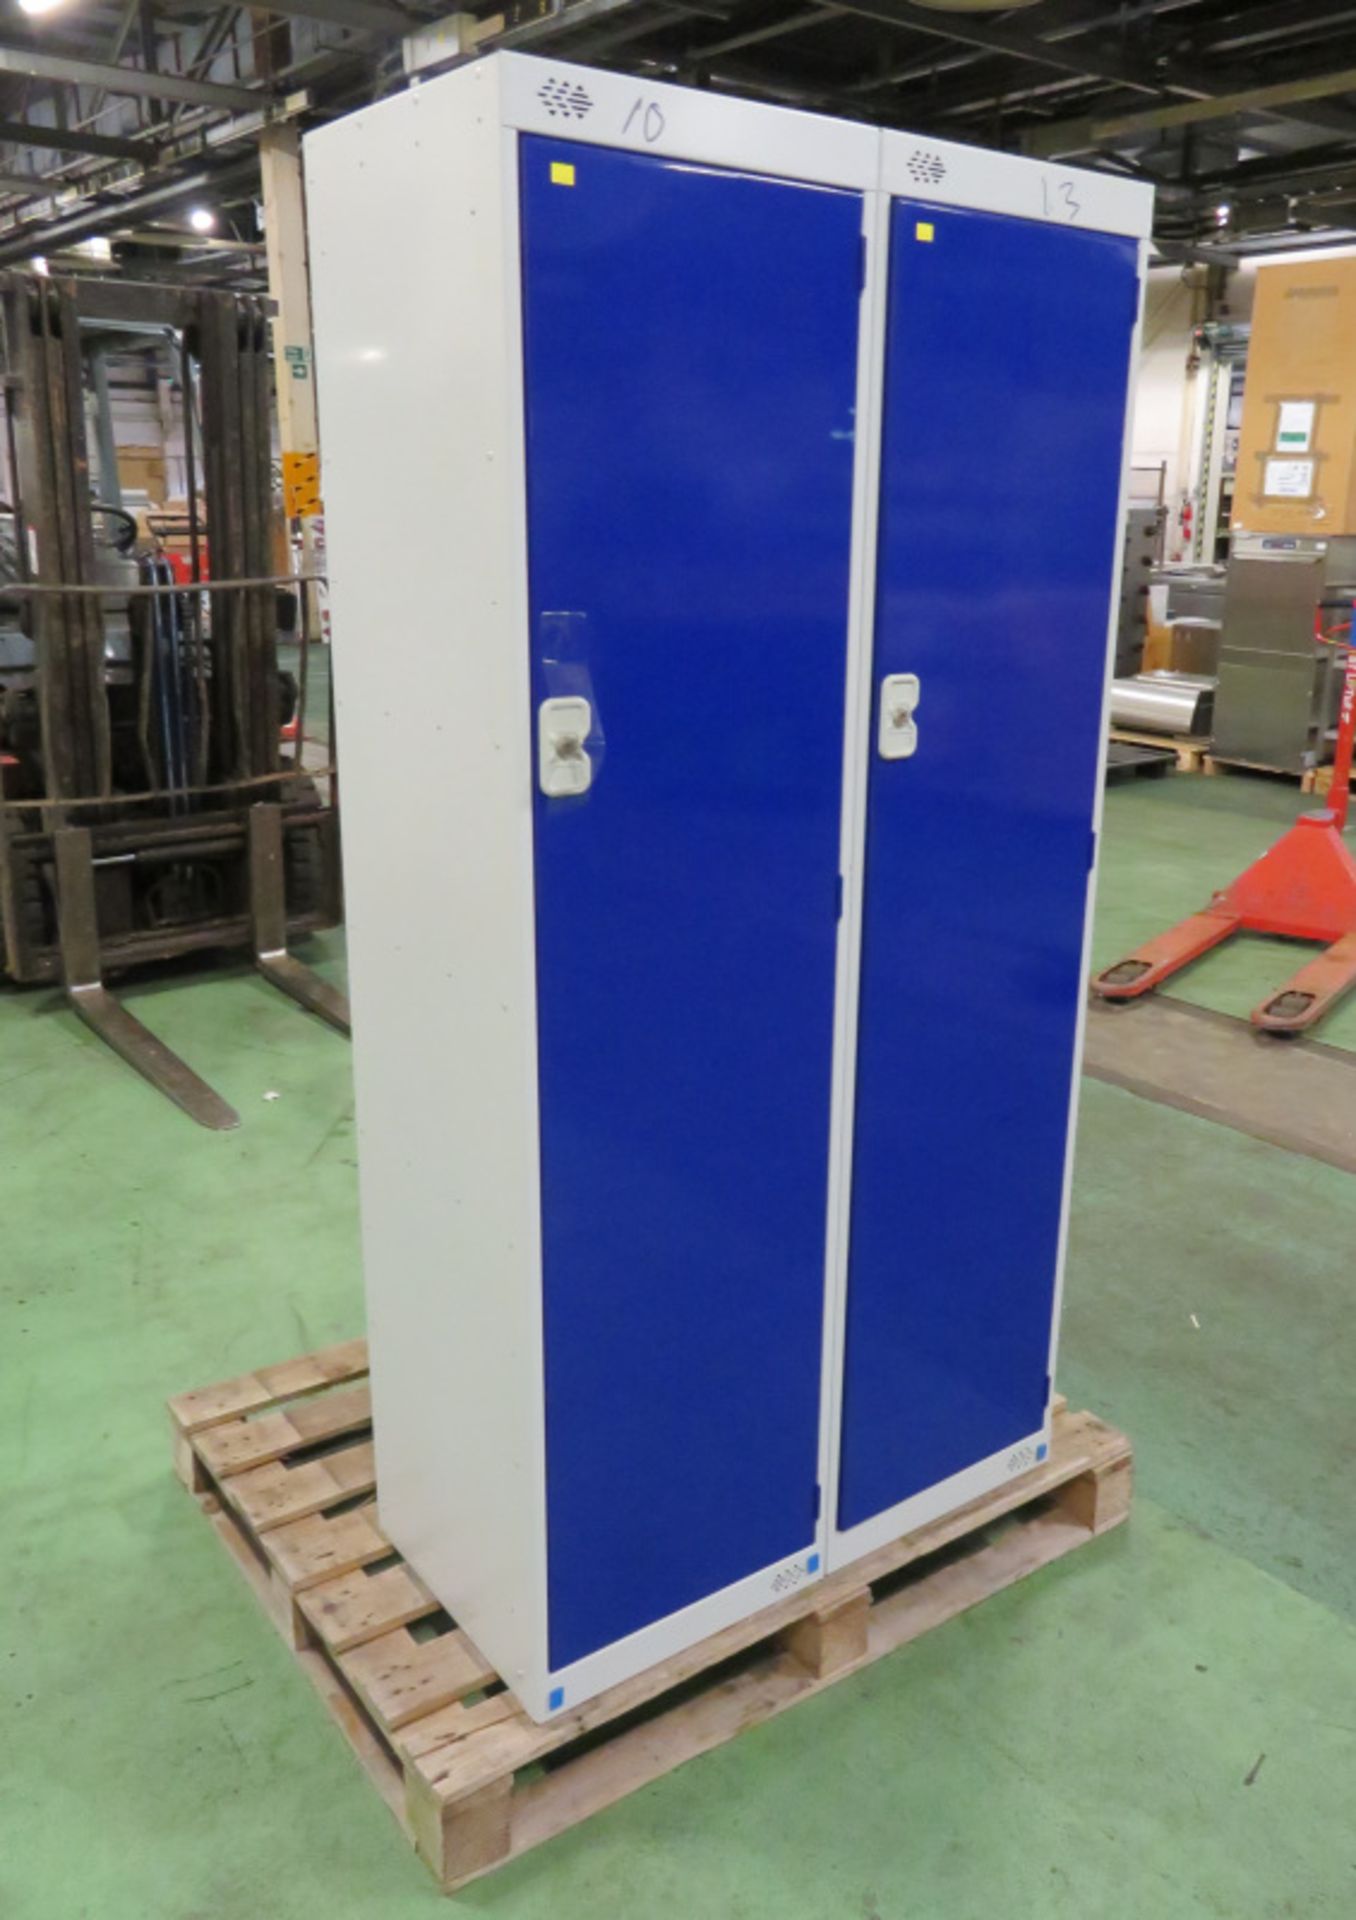 3x Metal Grey / Blue Lockers L 450mm x W 450mm x H1800mm - Image 2 of 6